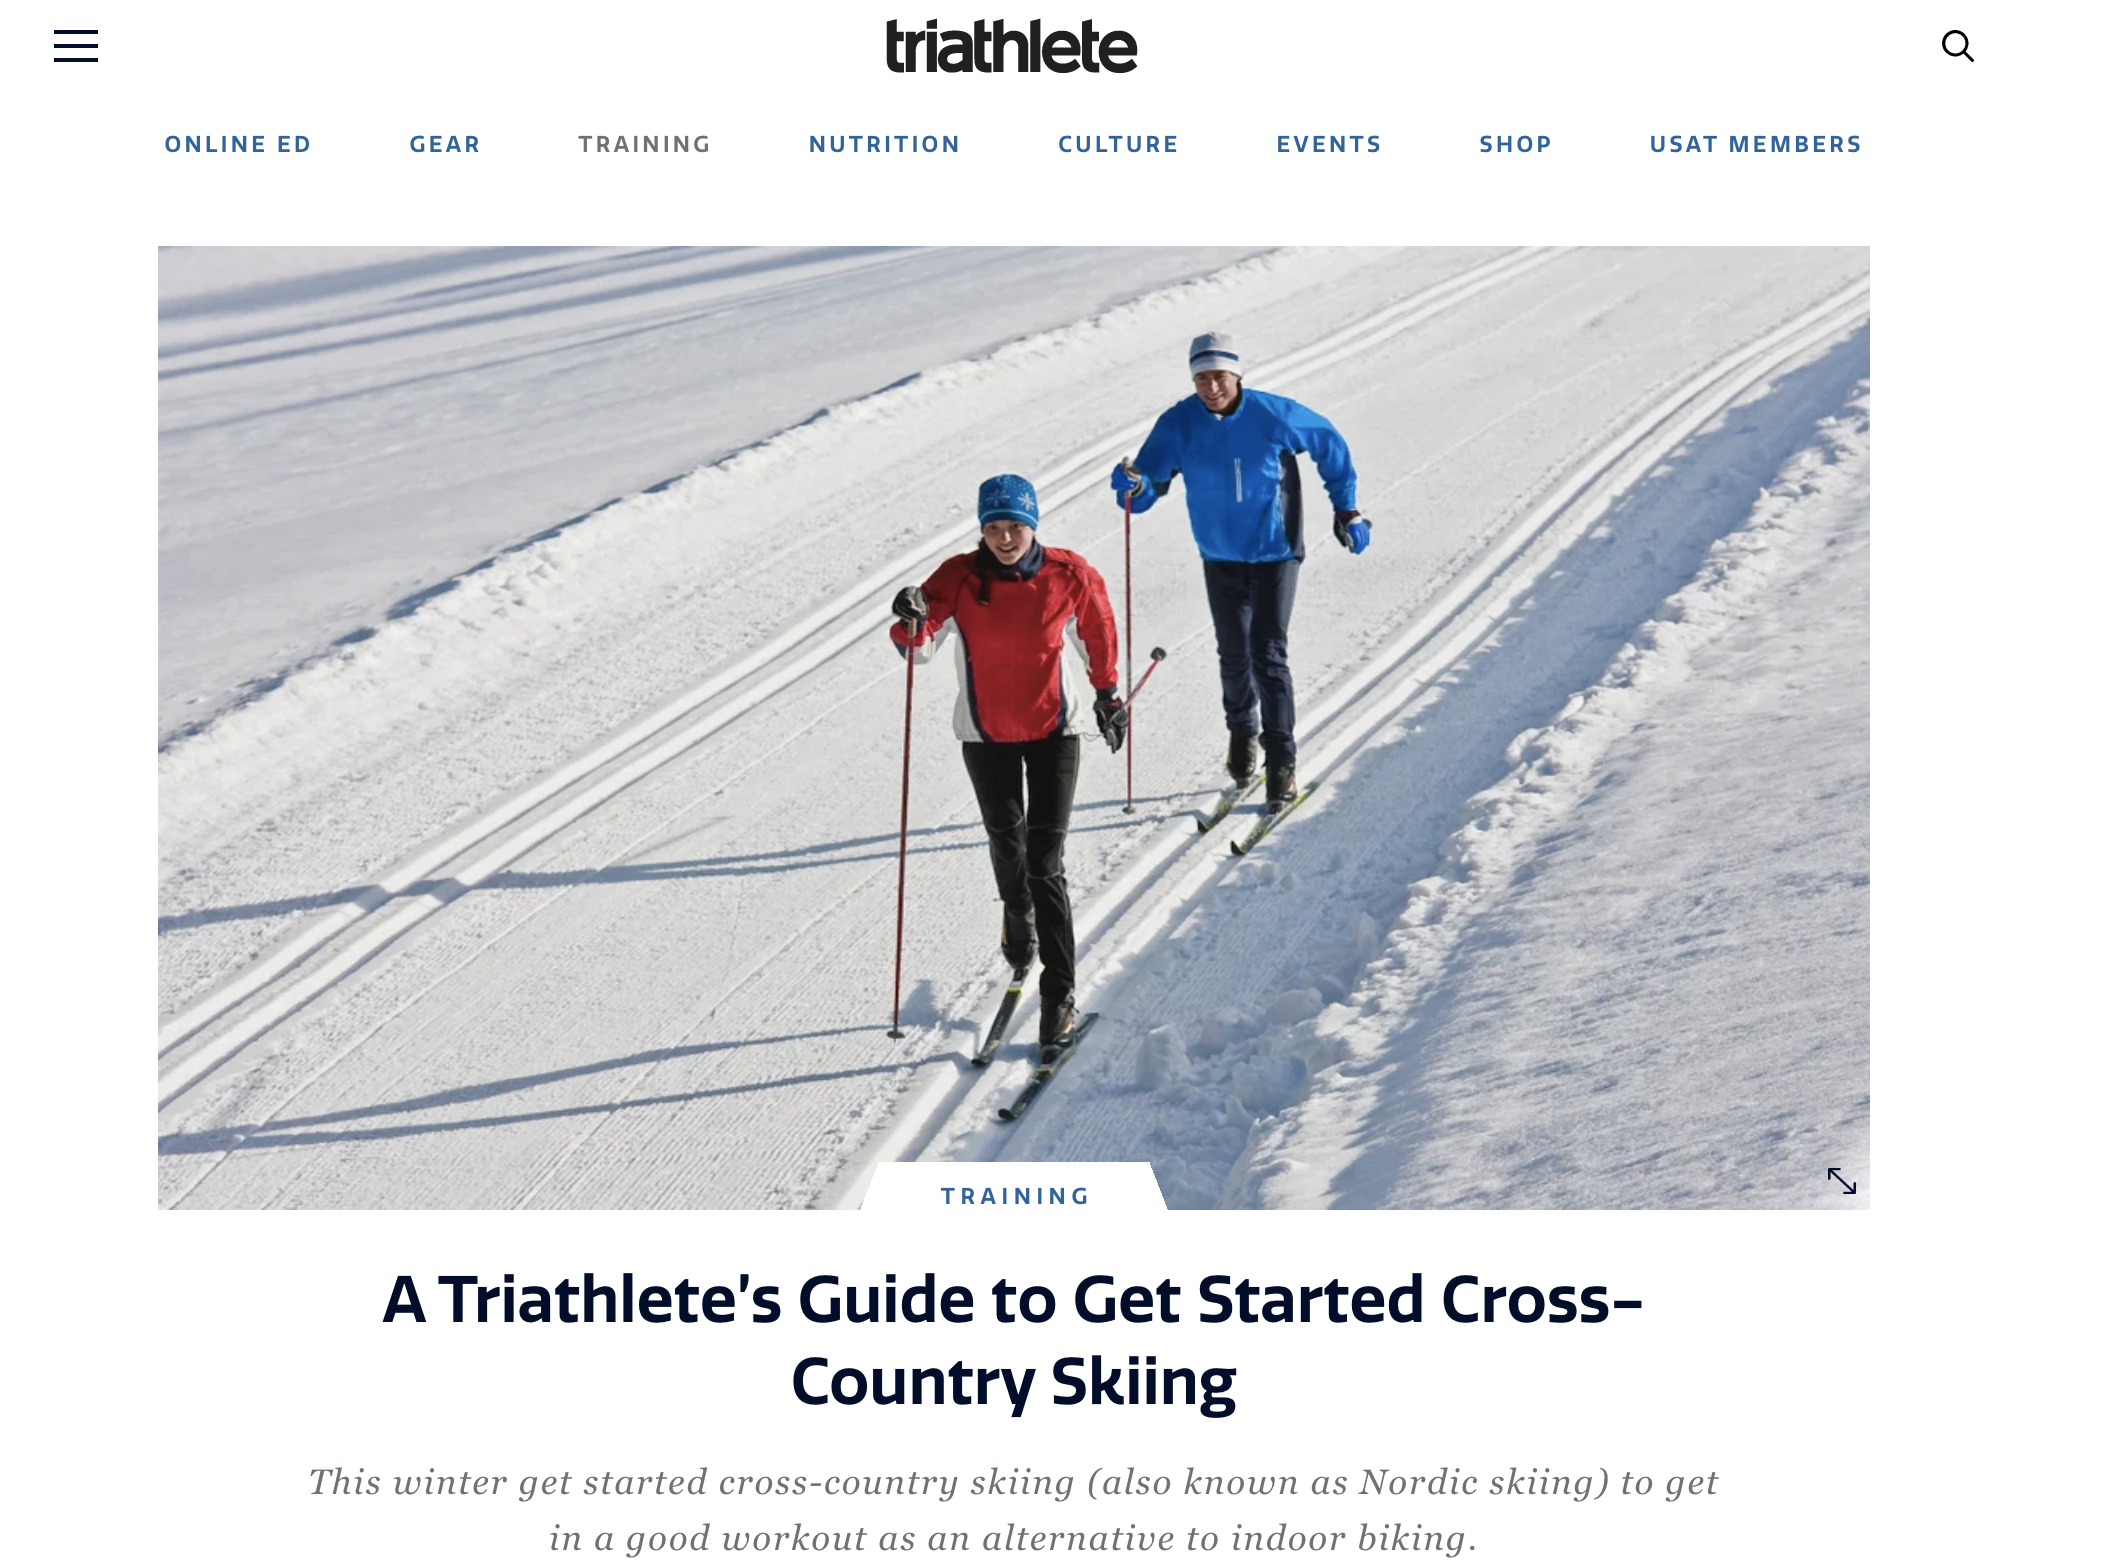 A Triathlete’s Guide to Get Started Cross-Country Skiing